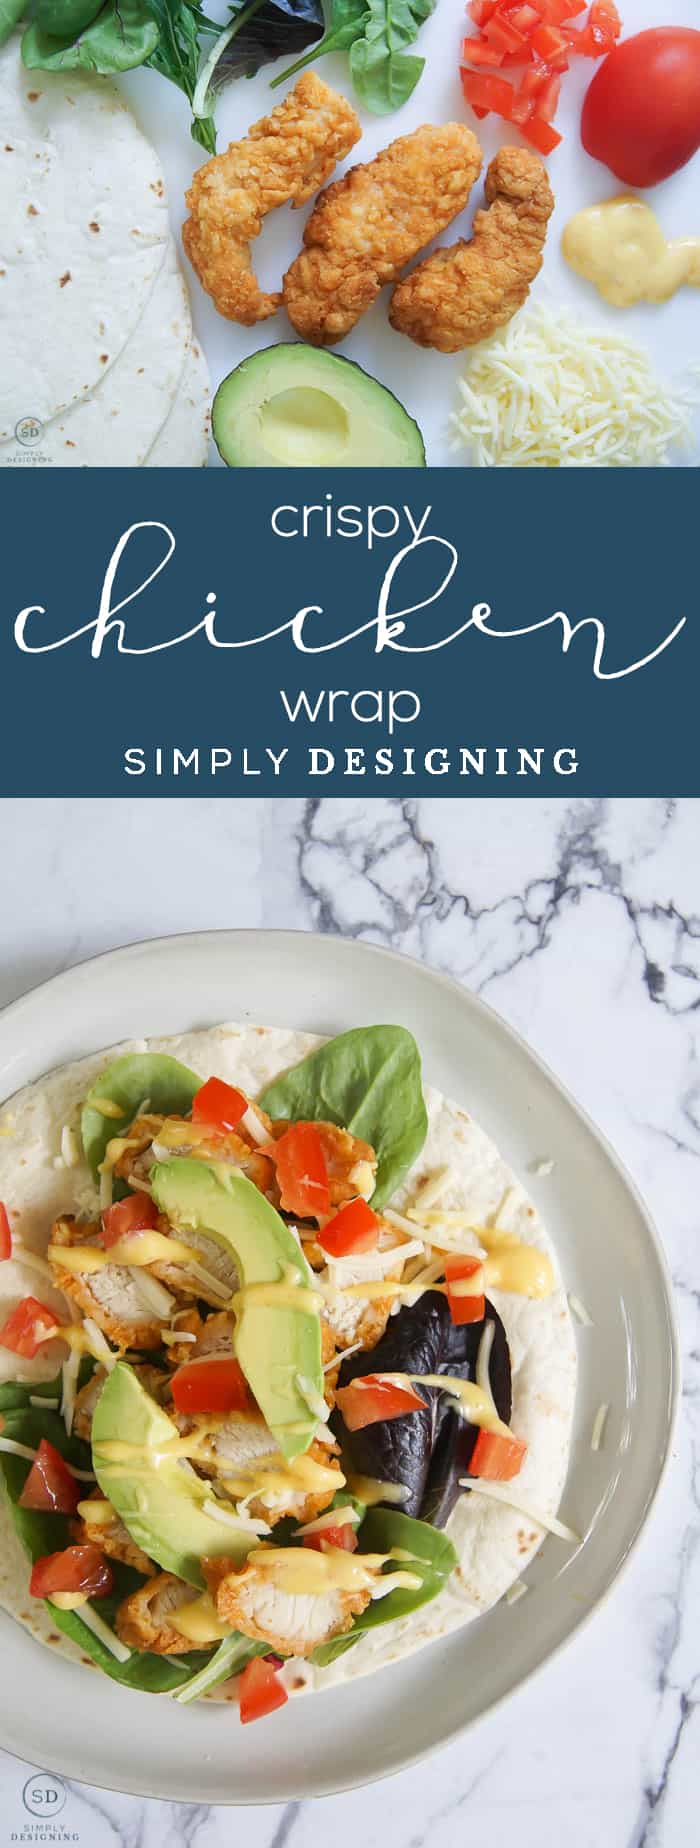 Crispy Chicken Wrap - This delicious crispy chicken wrap is perfect for lunch or dinner - It only takes a few minutes to make and you can customize too